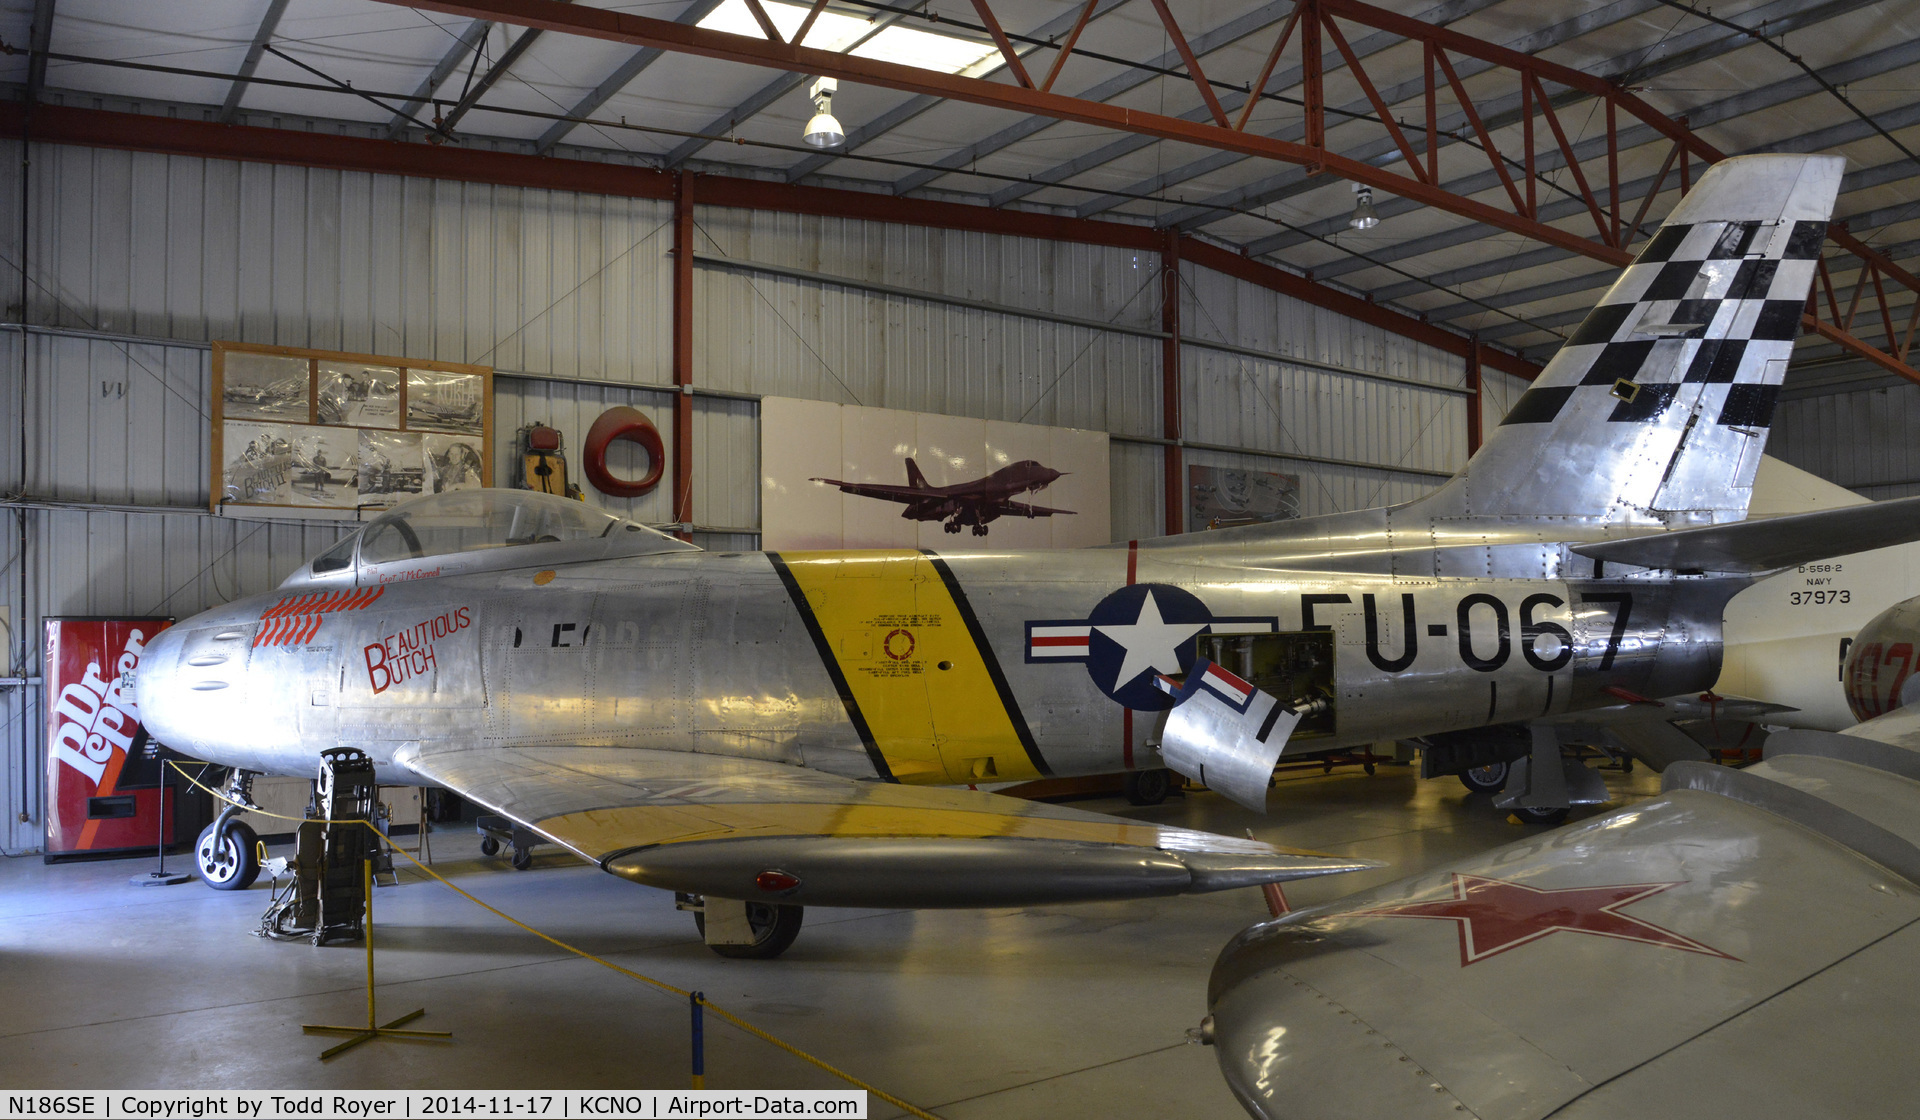 N186SE, North American F-86E Sabre C/N 172-358, On display at the Planes of Fame Chino location